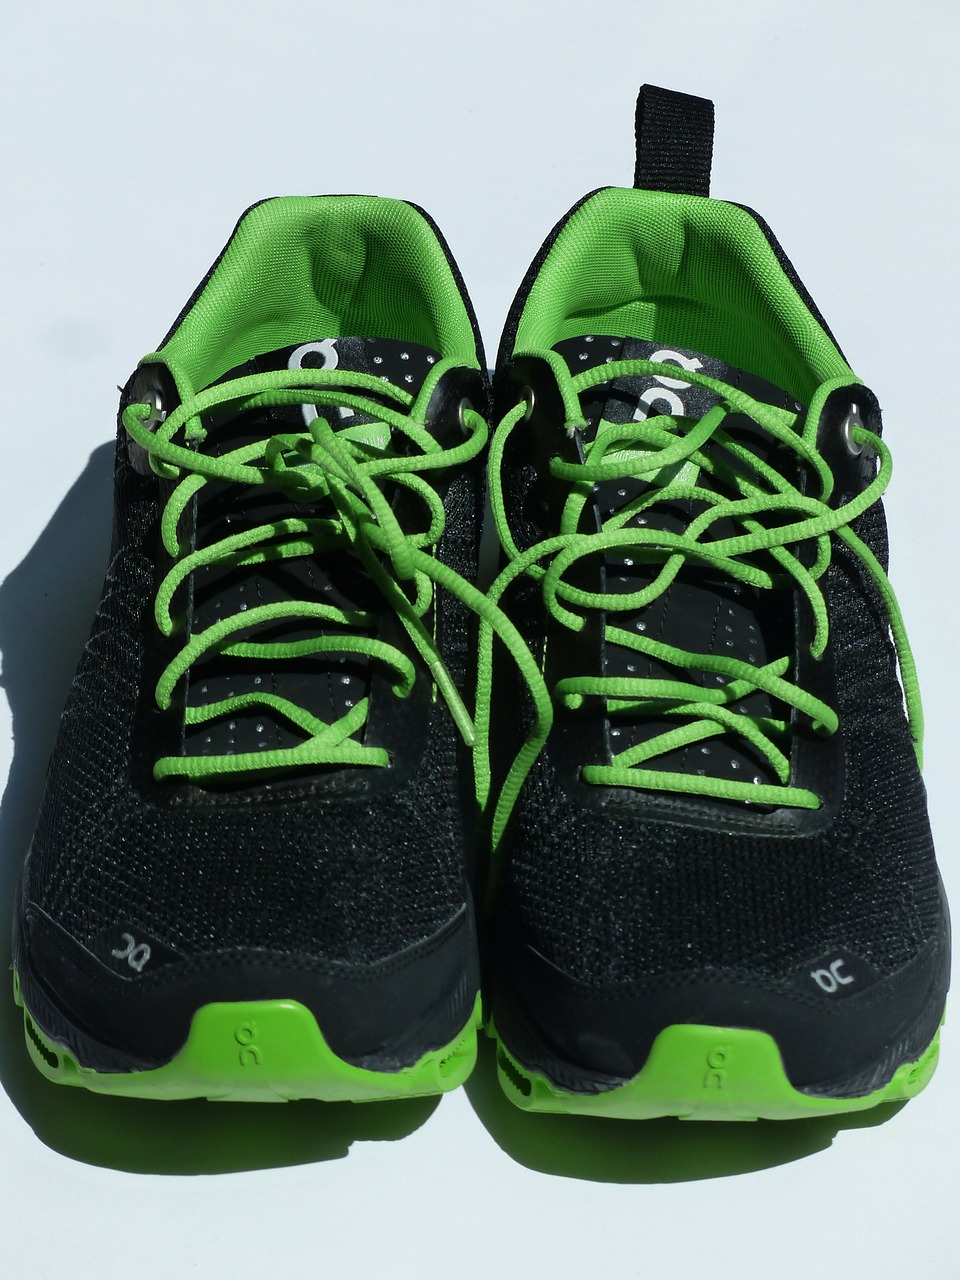 sports shoes running shoes sneakers free photo